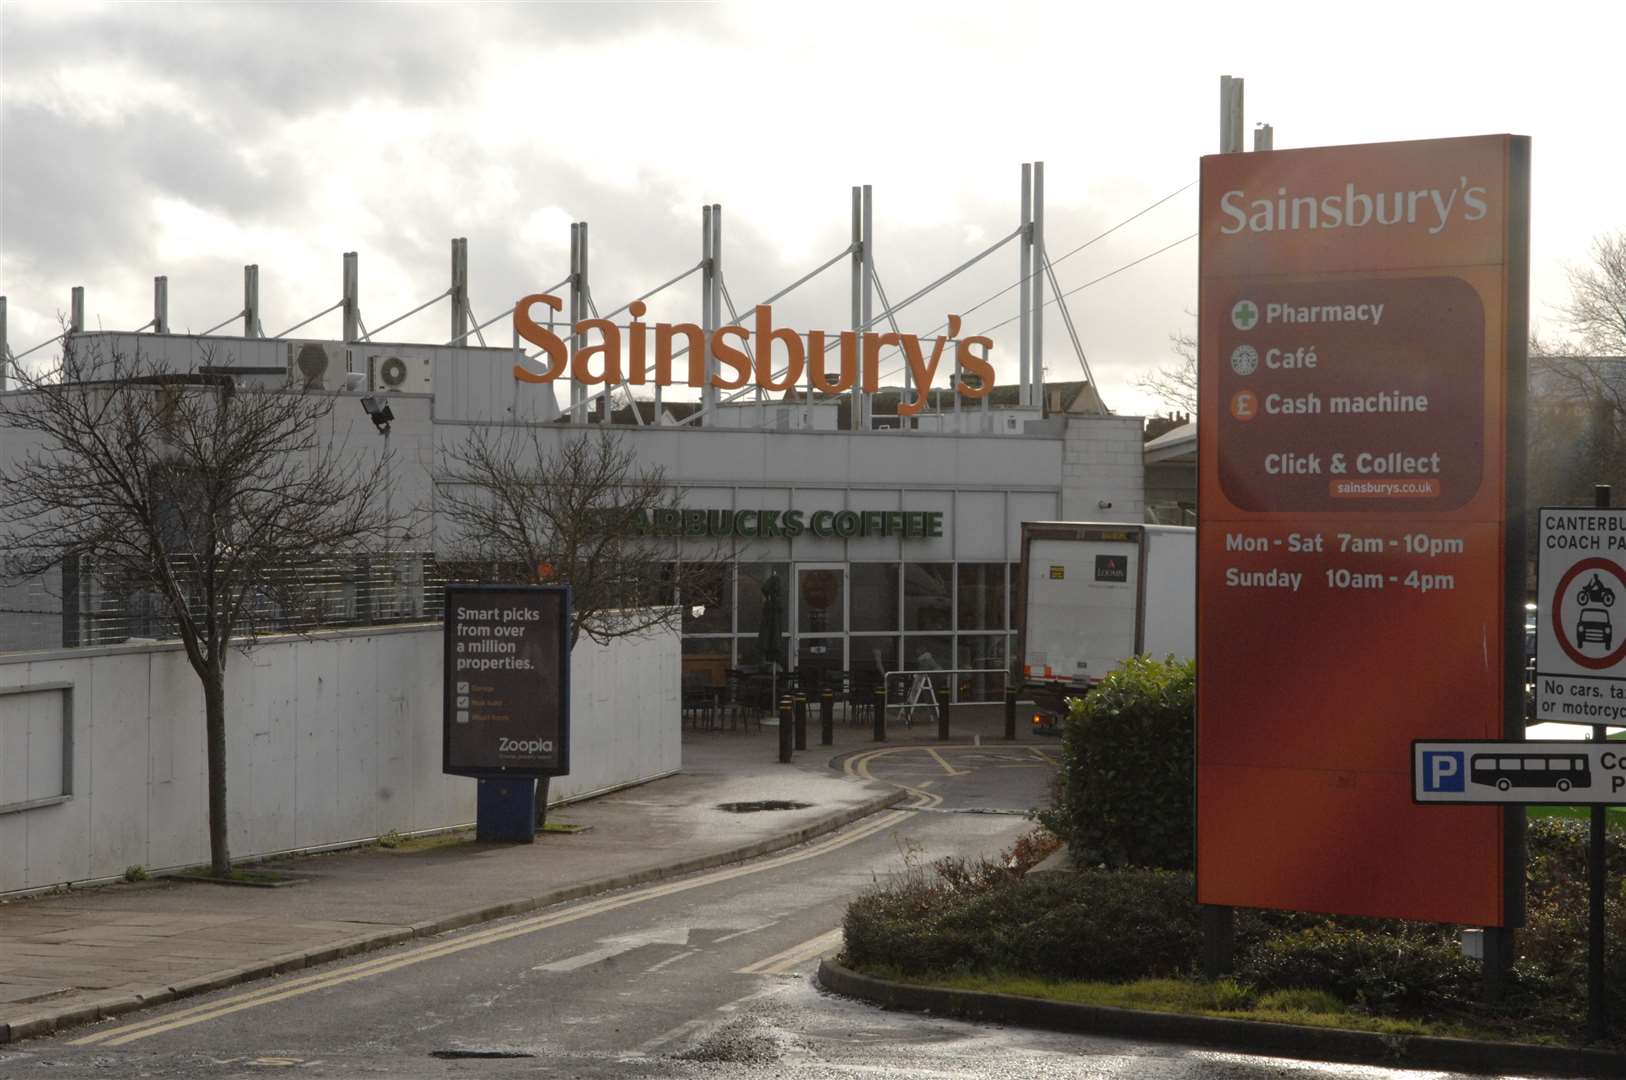 The Sainsbury's store in Kingsmead Road, Canterbury. Picture: Chris Davey